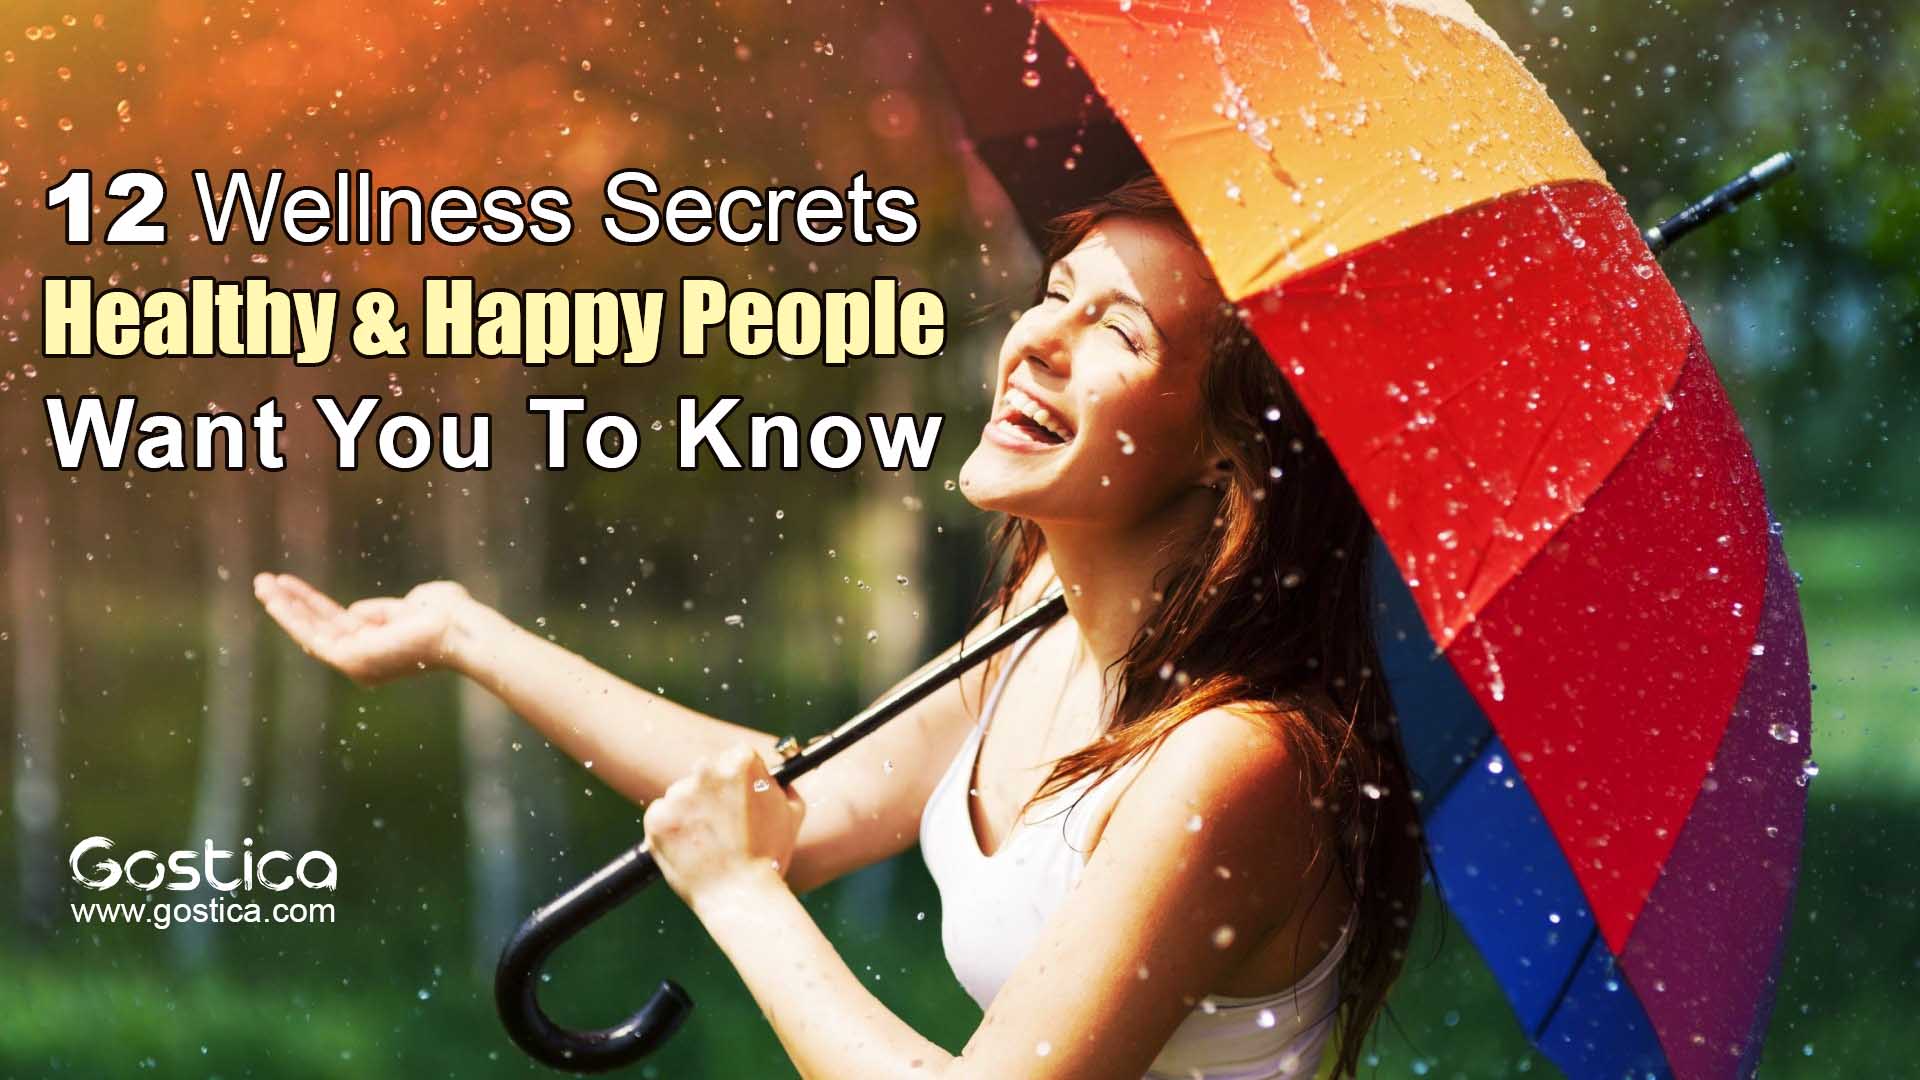 12-Wellness-Secrets-Healthy-Happy-People-Want-You-To-Know.jpg